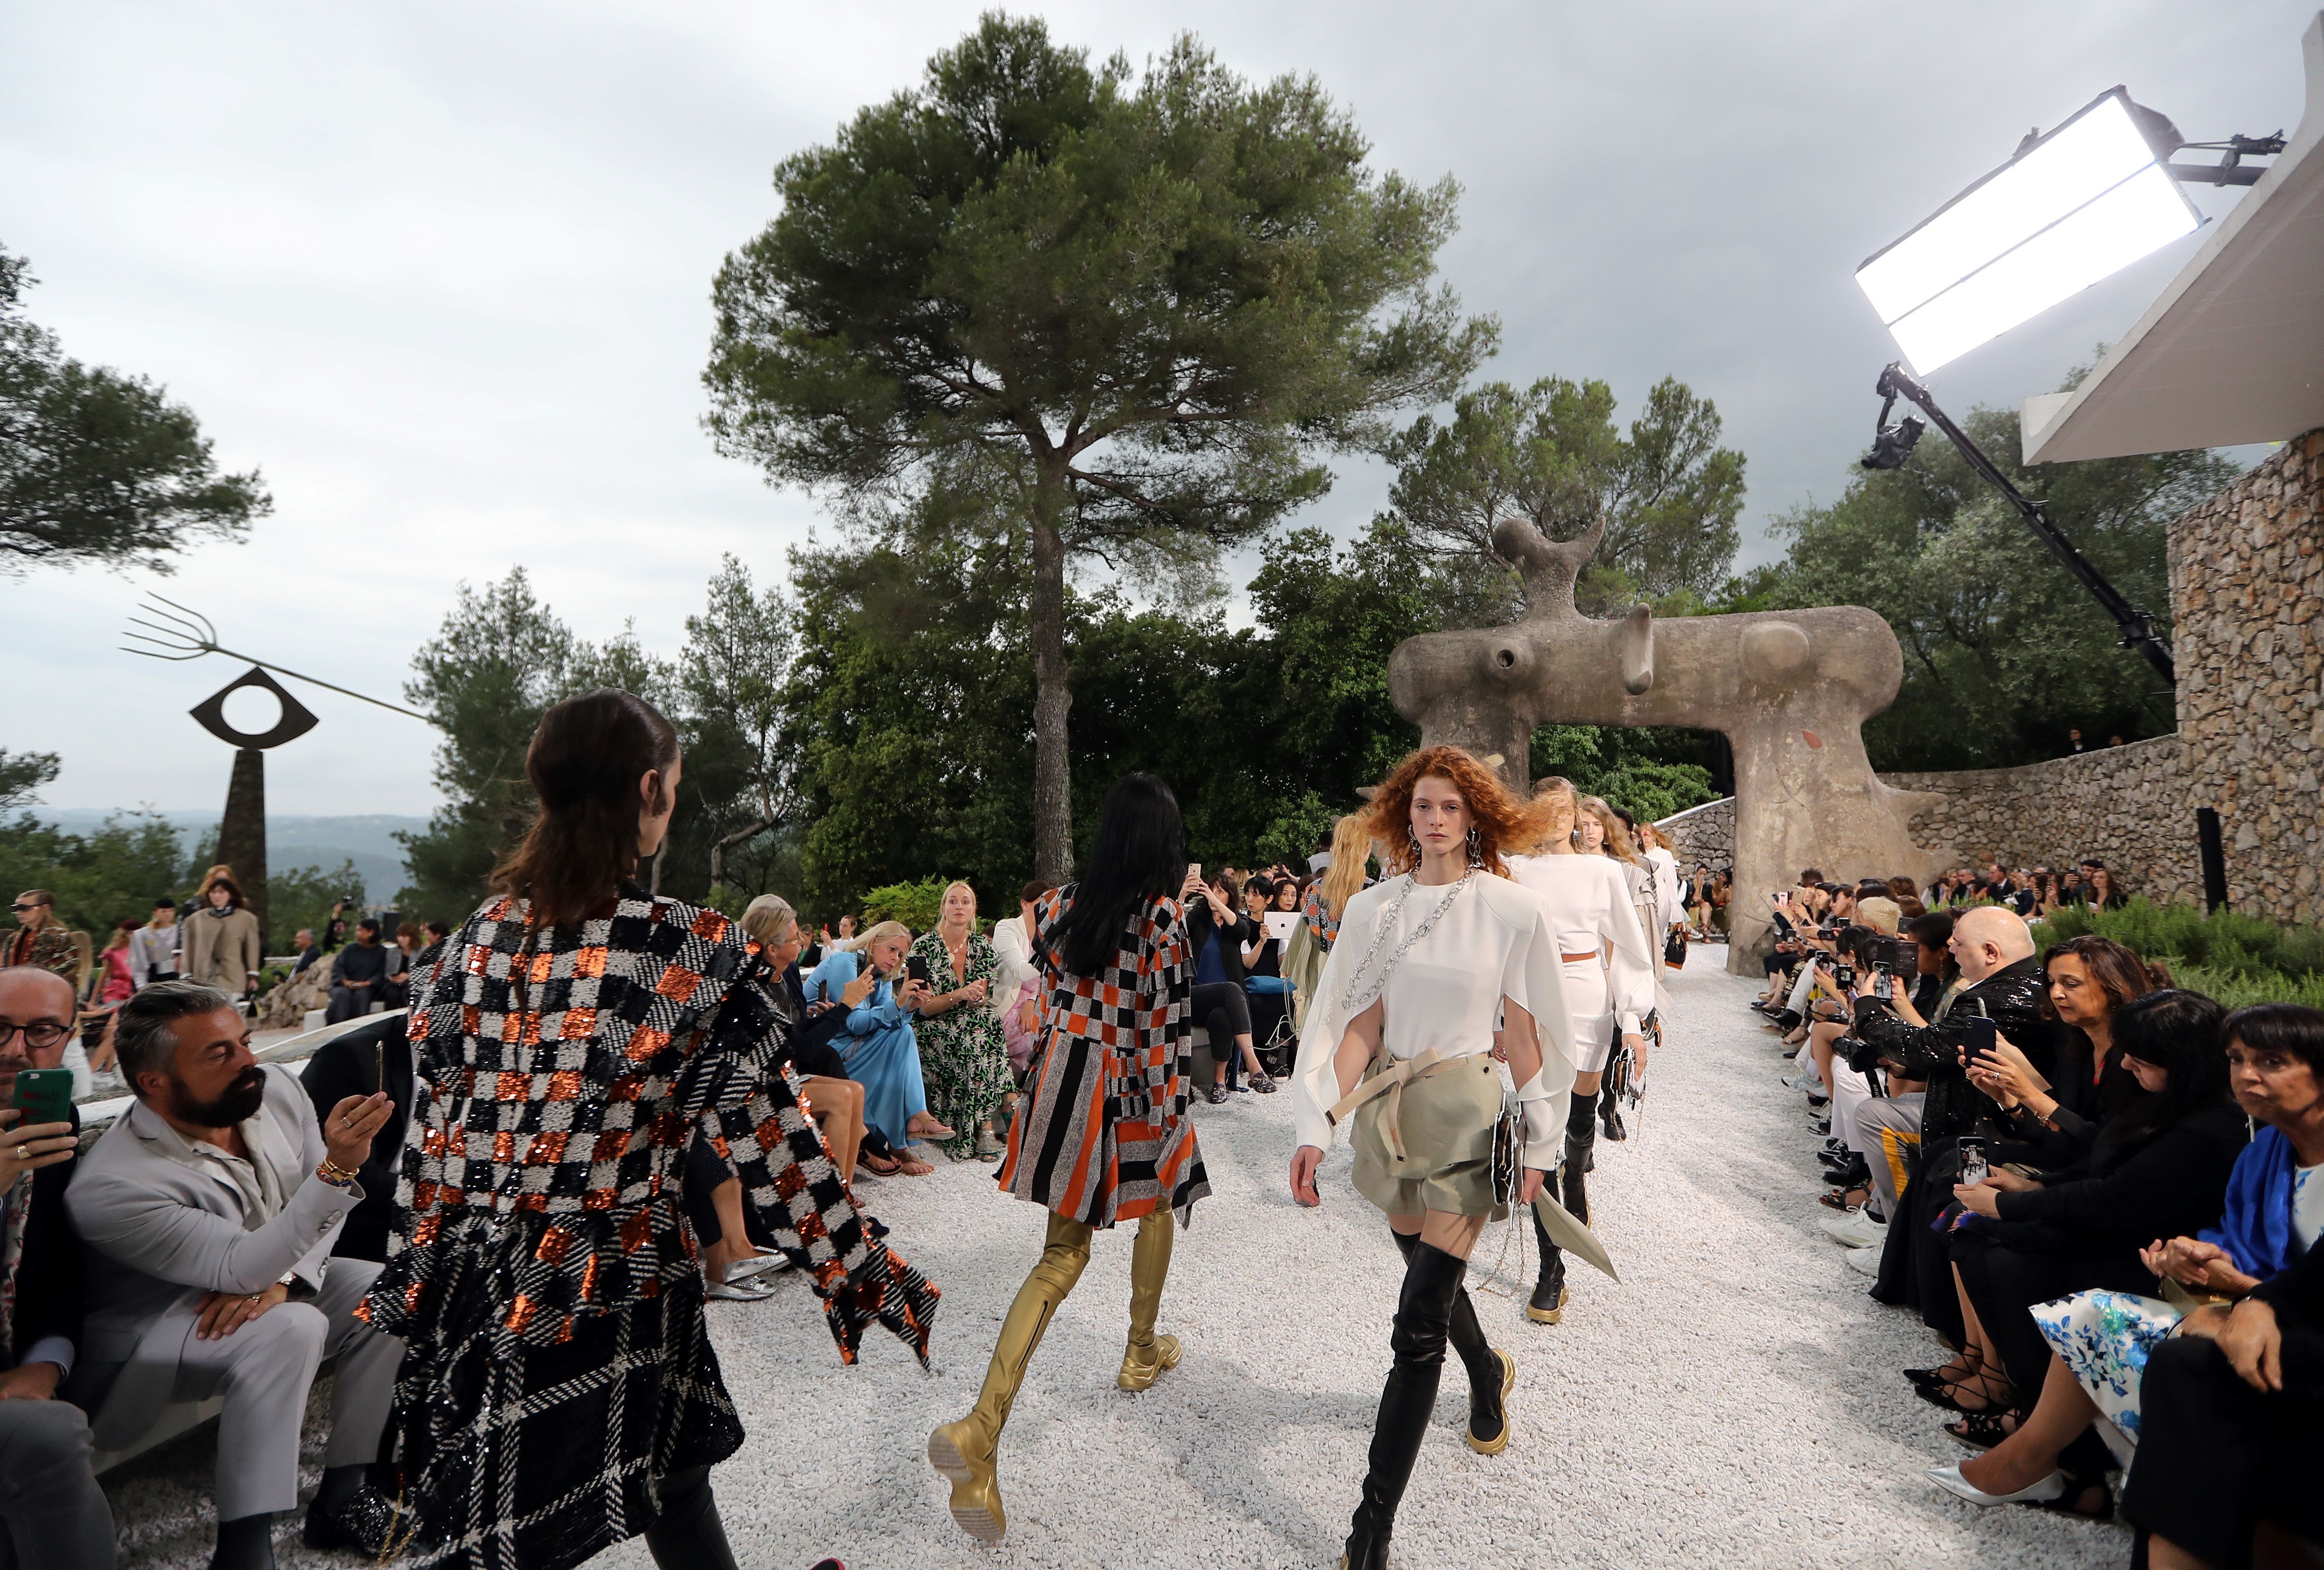 Louis Vuitton's Cruise 2020 Show Will Take Off at JFK Airport